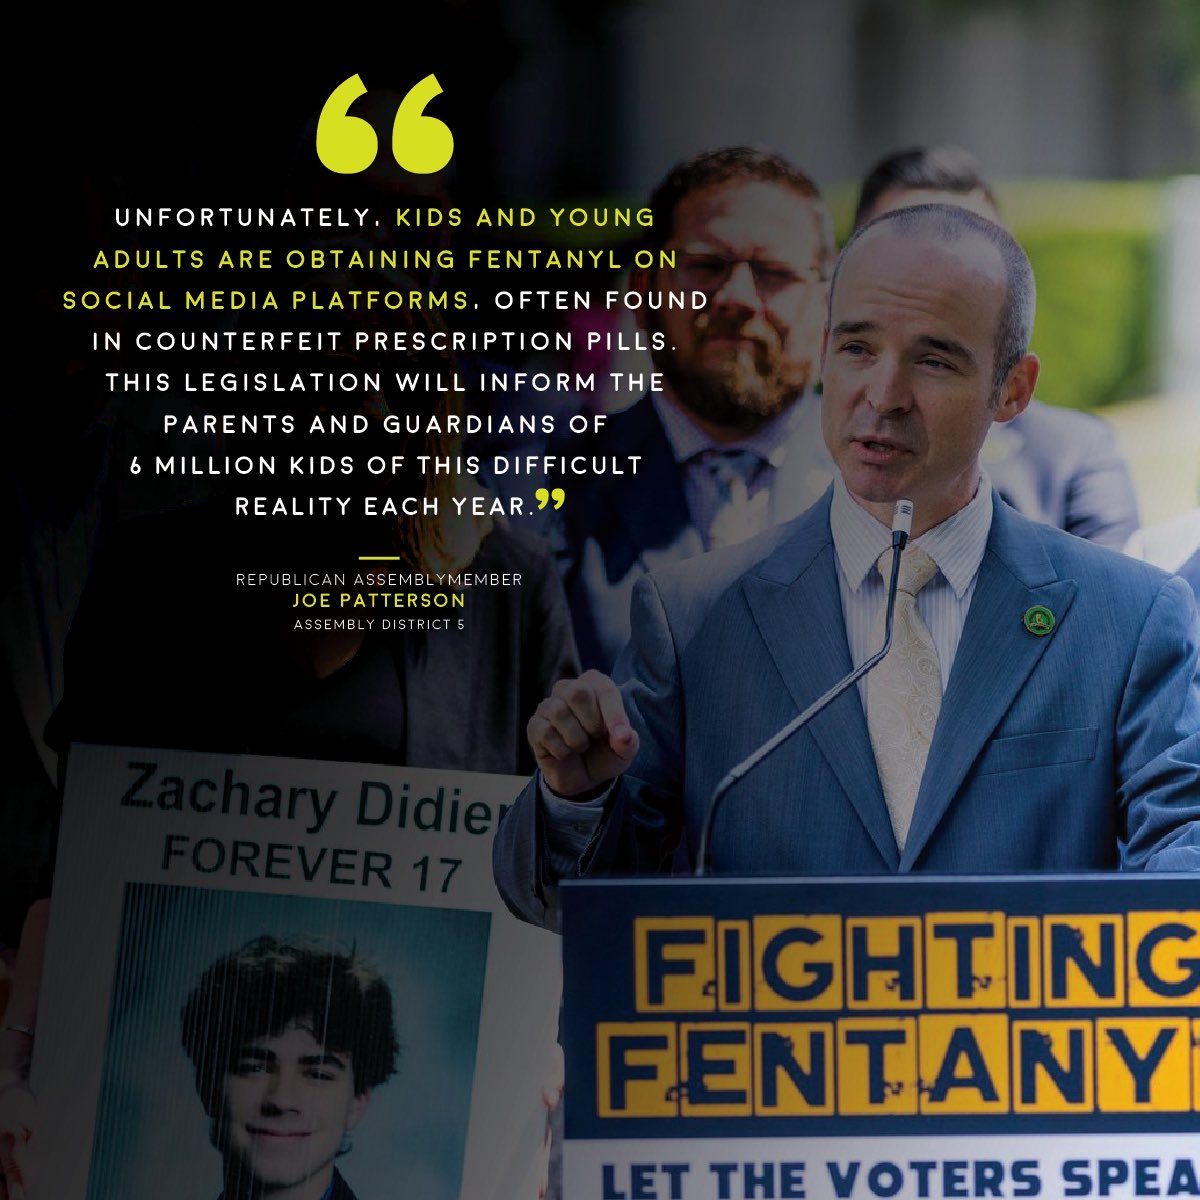 Yesterday I introduced AB 2690. This legislation will warn parents and guardians that fentanyl and other opioids is often obtained on social media platforms. AB 2690 builds on a current law that I authored last year, and will be given annual to parents of school-aged children.